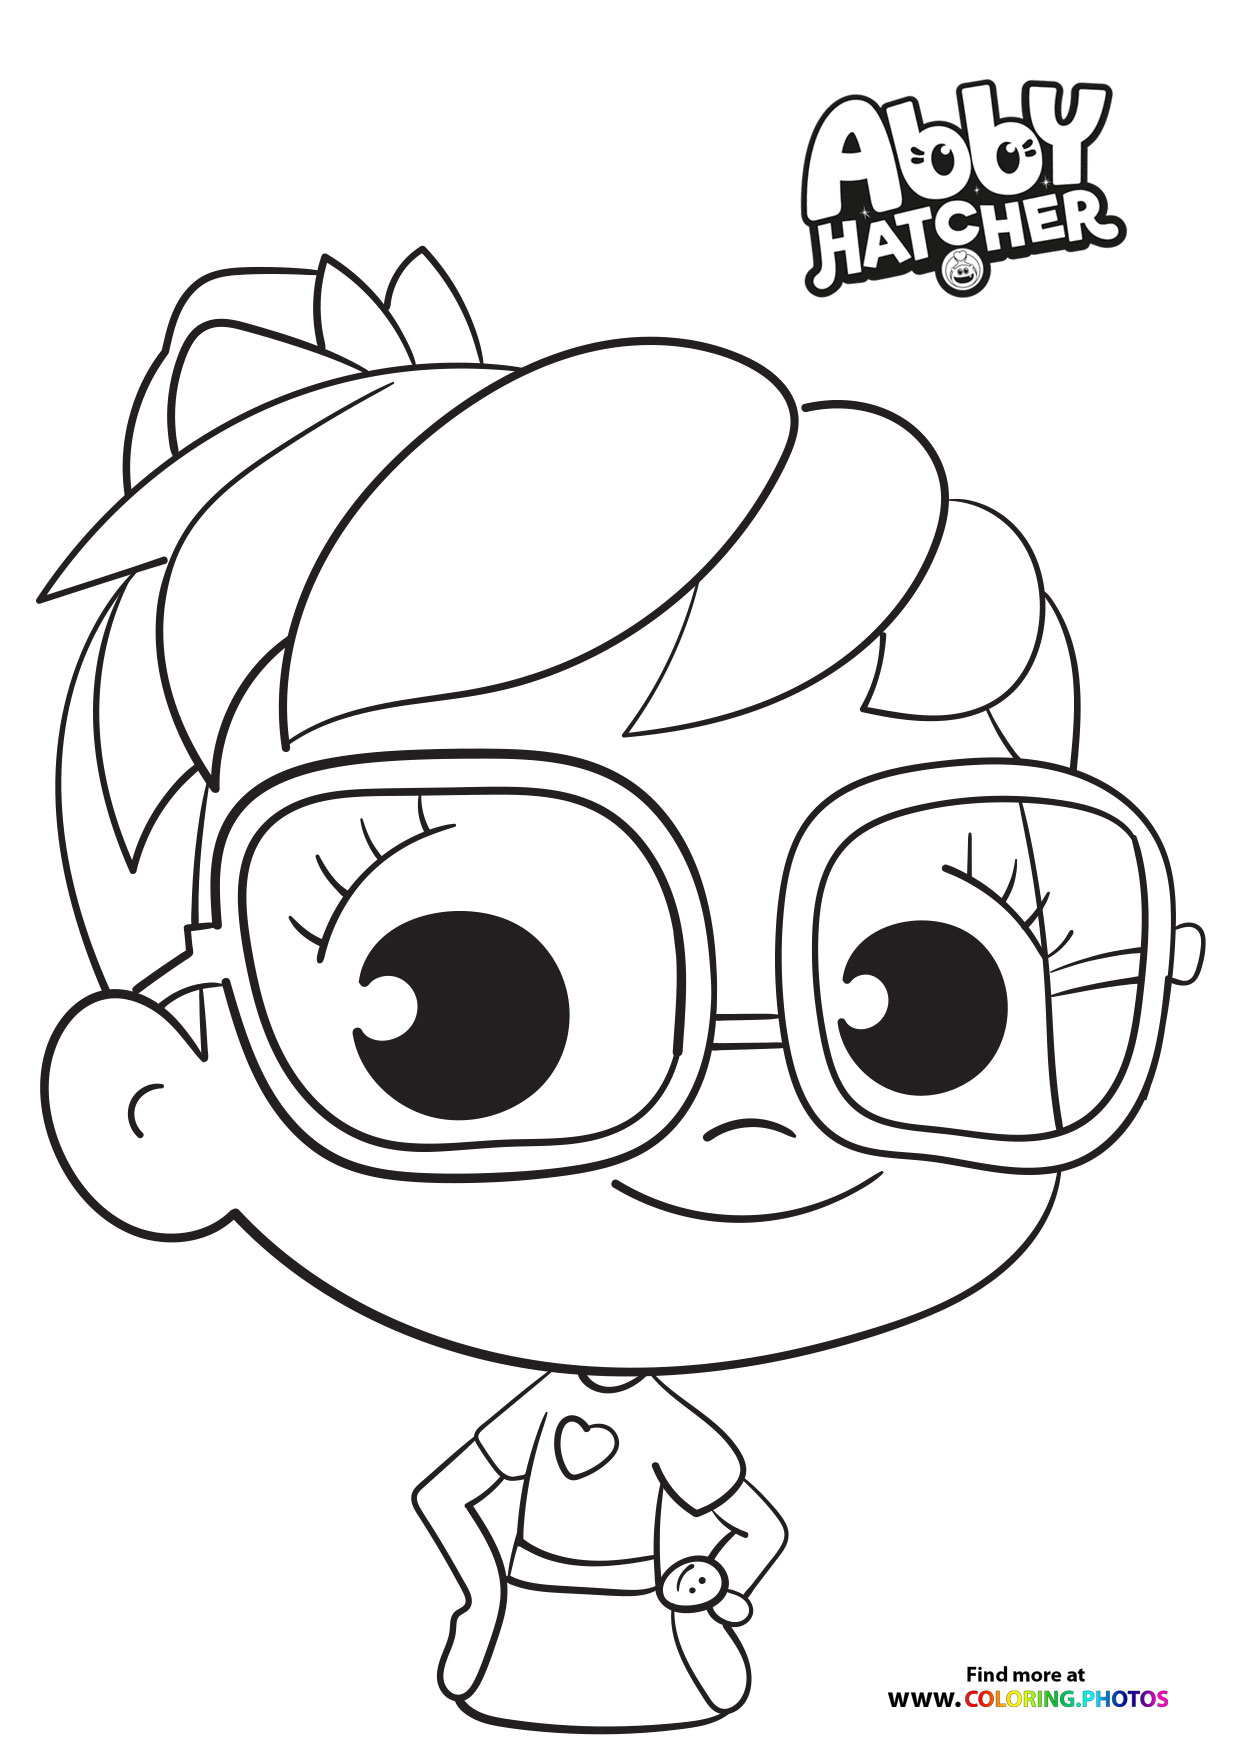 abby hatcher coloring page Abby hatcher and her friends - Printable ...